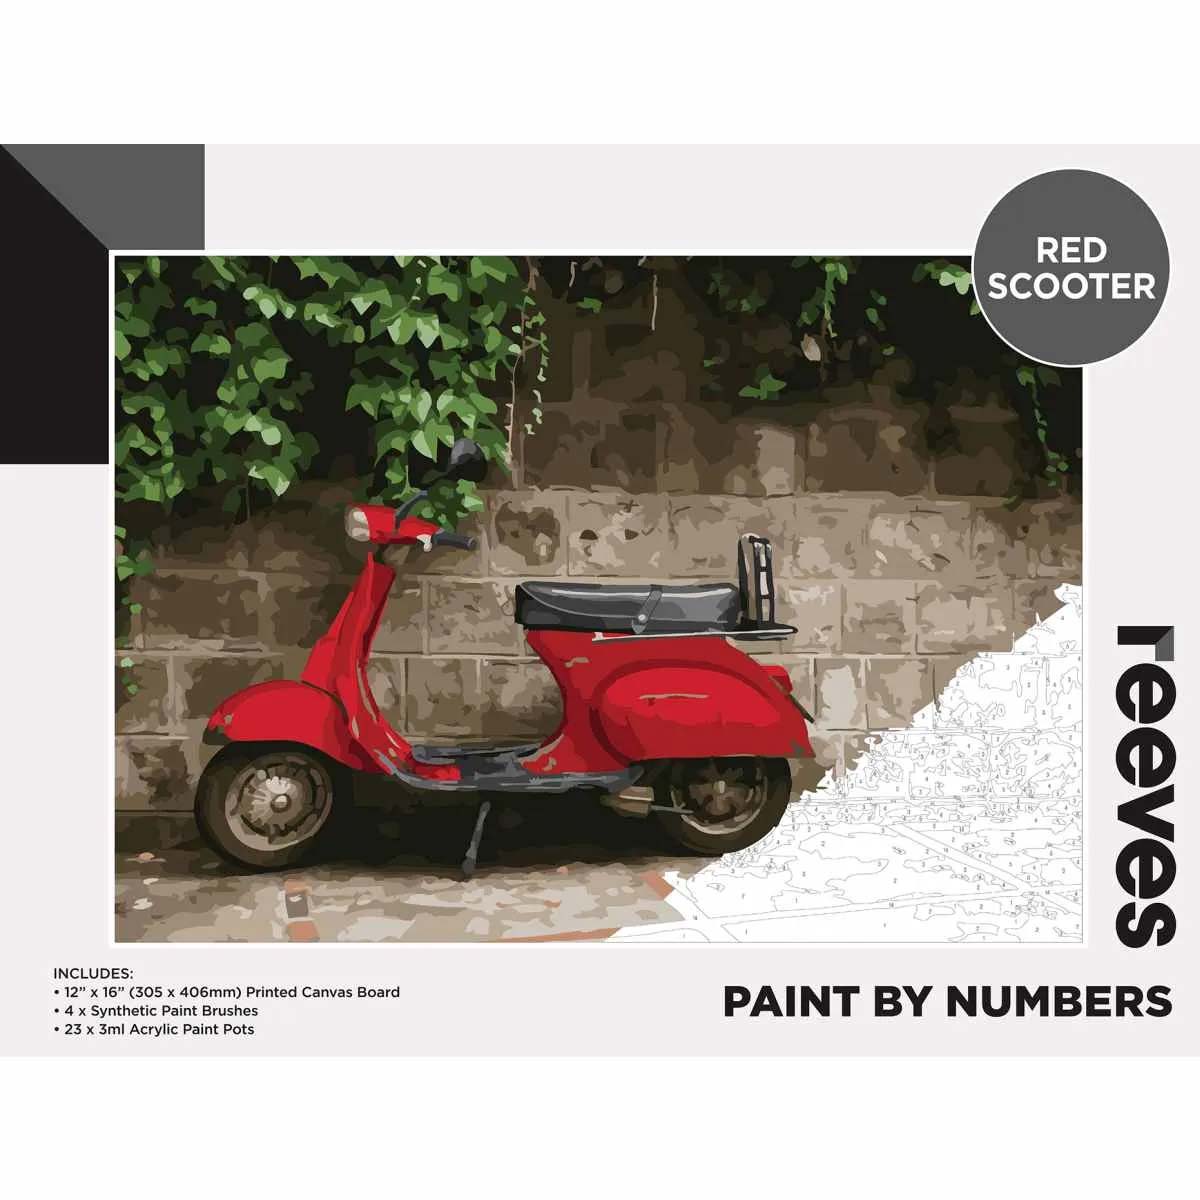 Reeves Paint in numeri grandi 12x16 pollici - scooter rosso